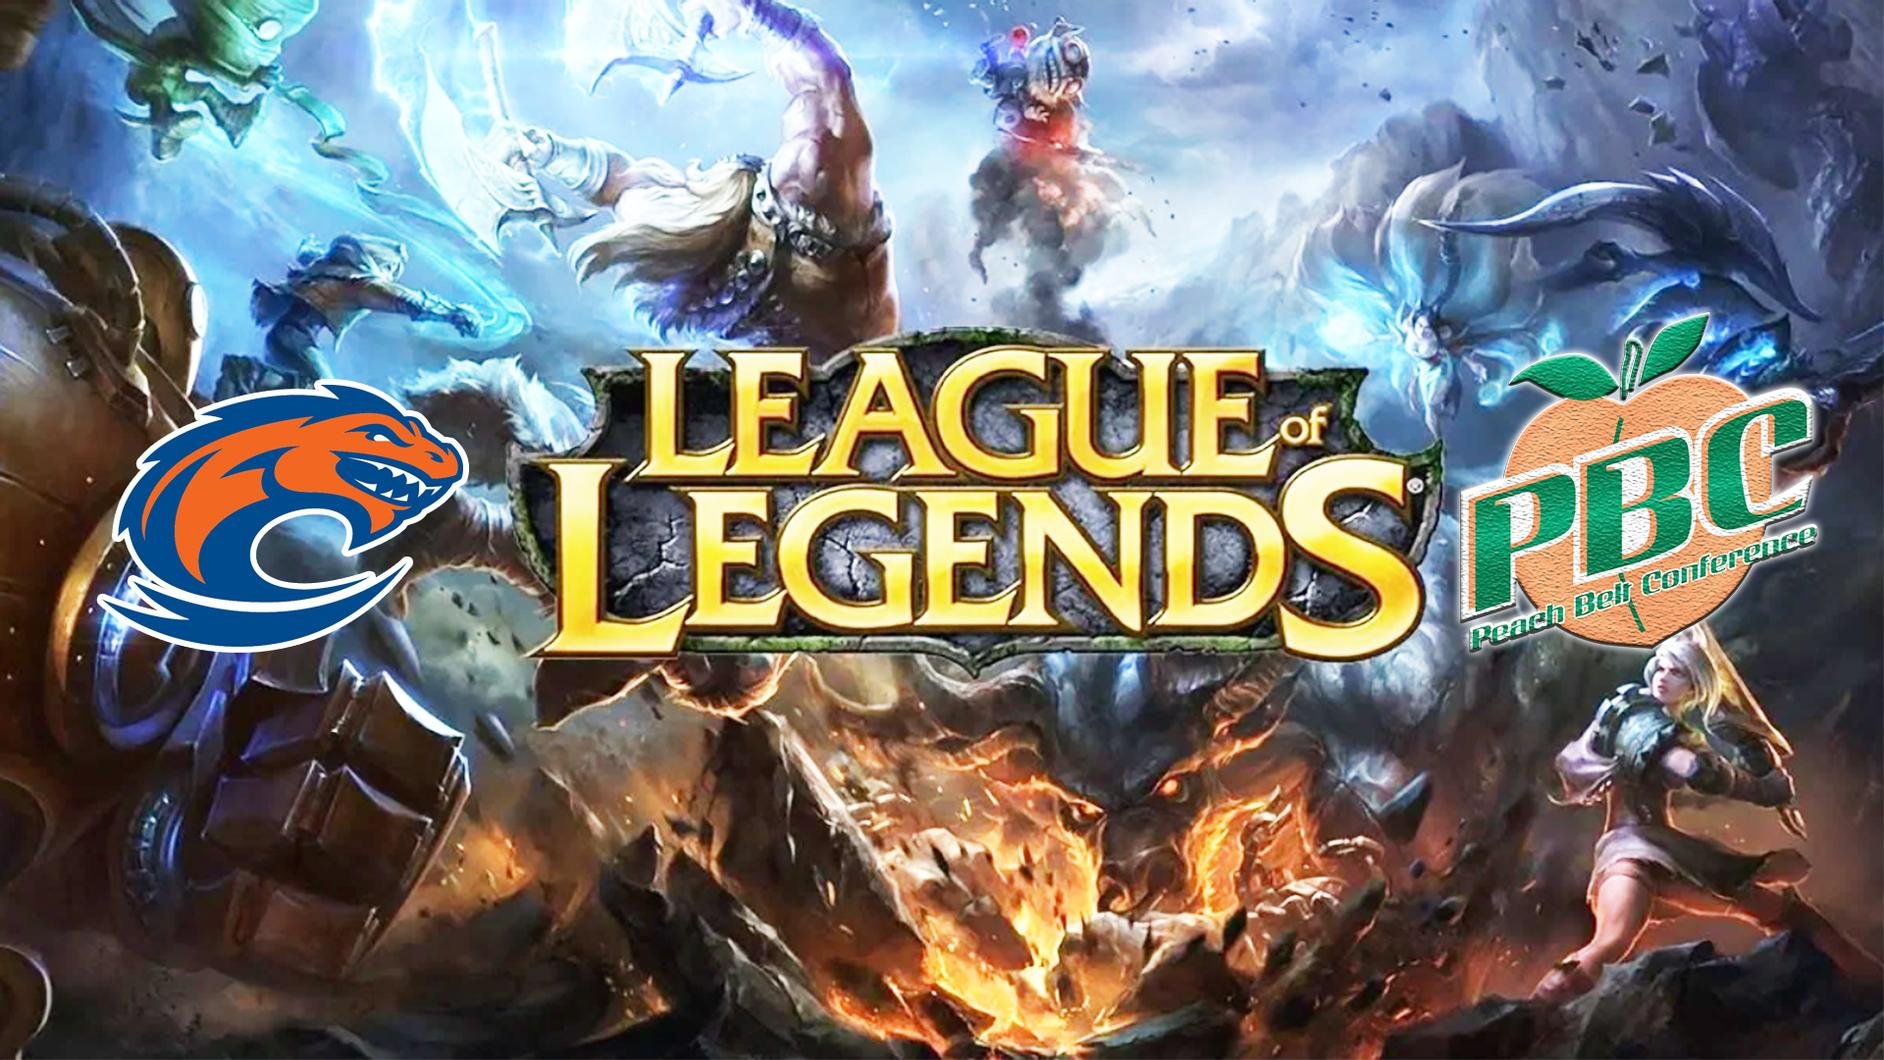 League of Legends video game